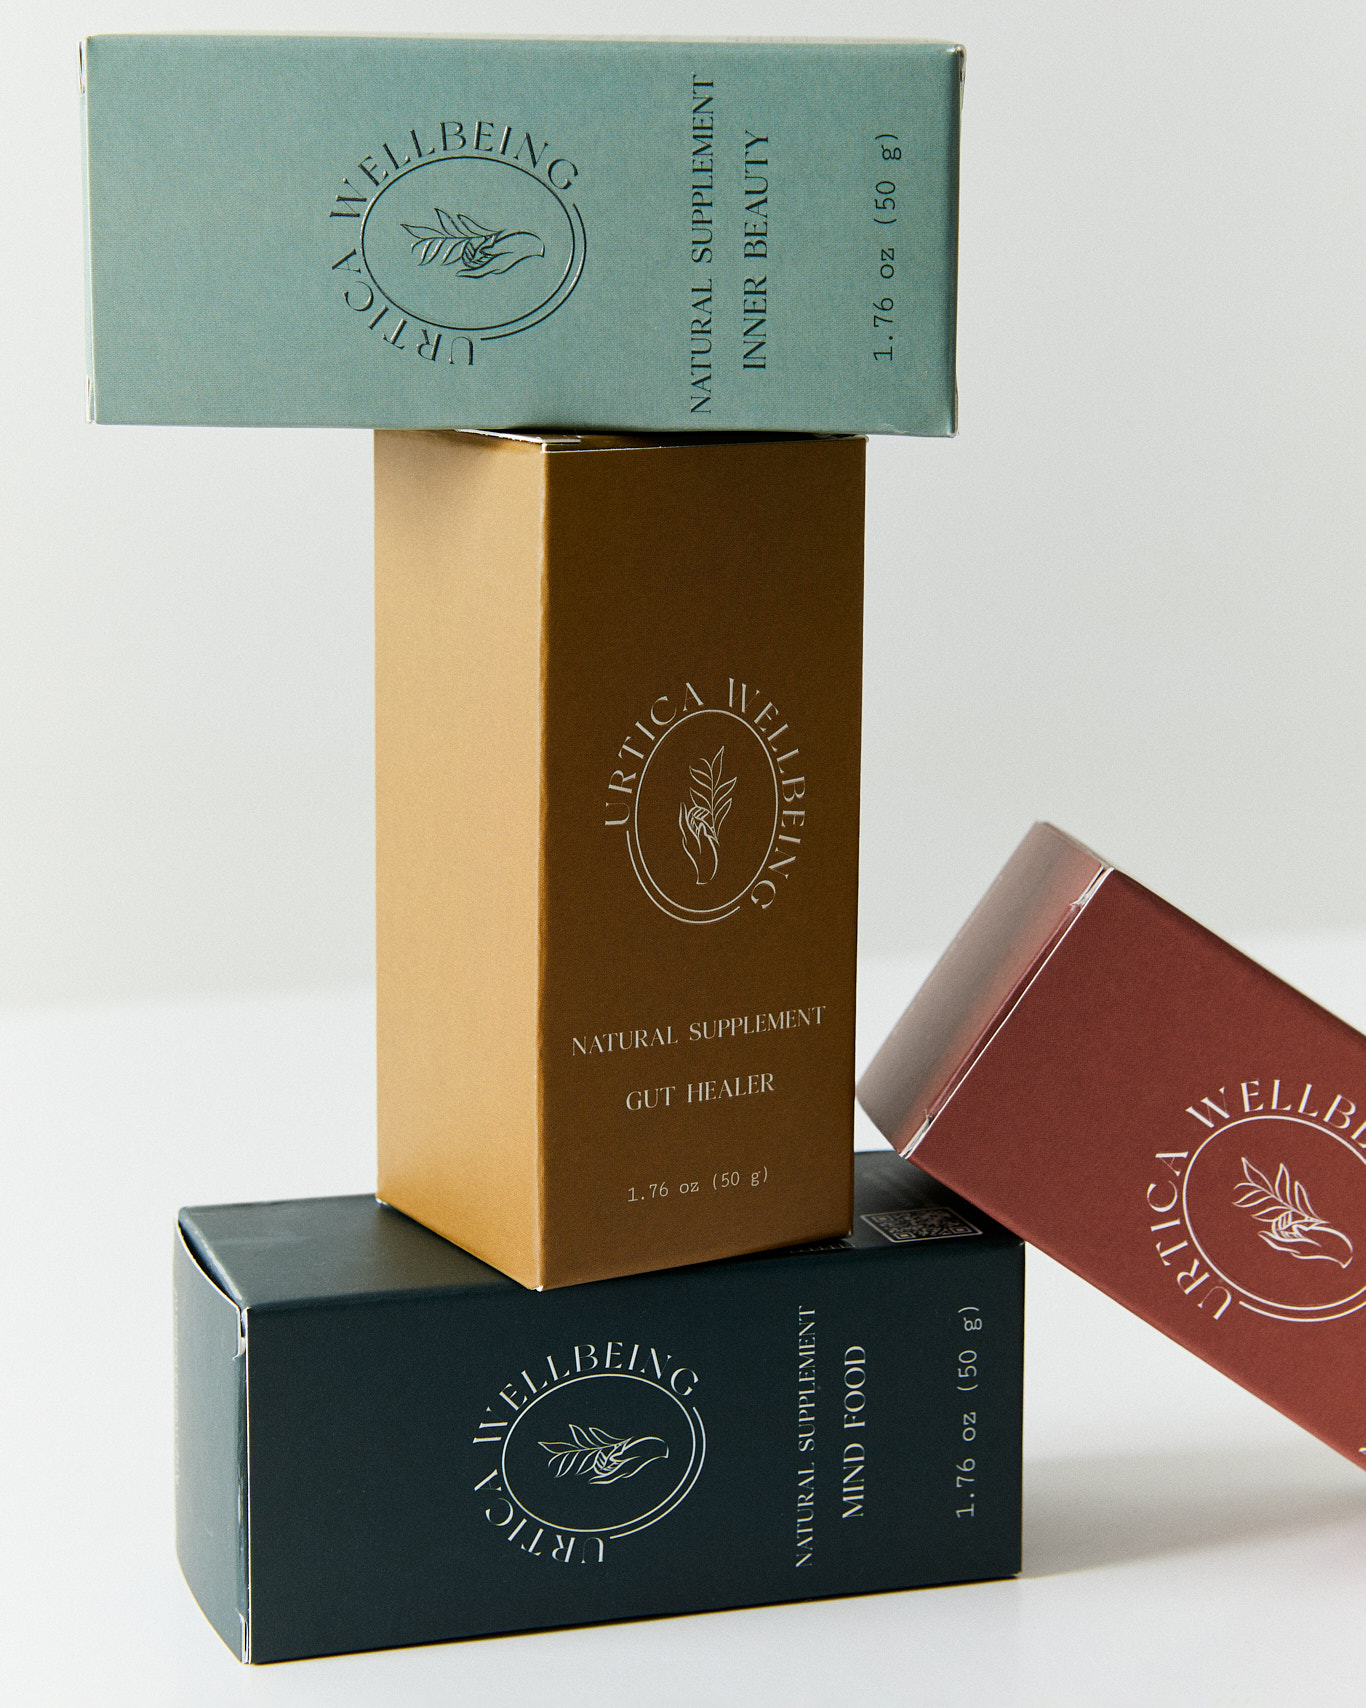 Branding Identity and Packaging Design for Urtica Wellbeing